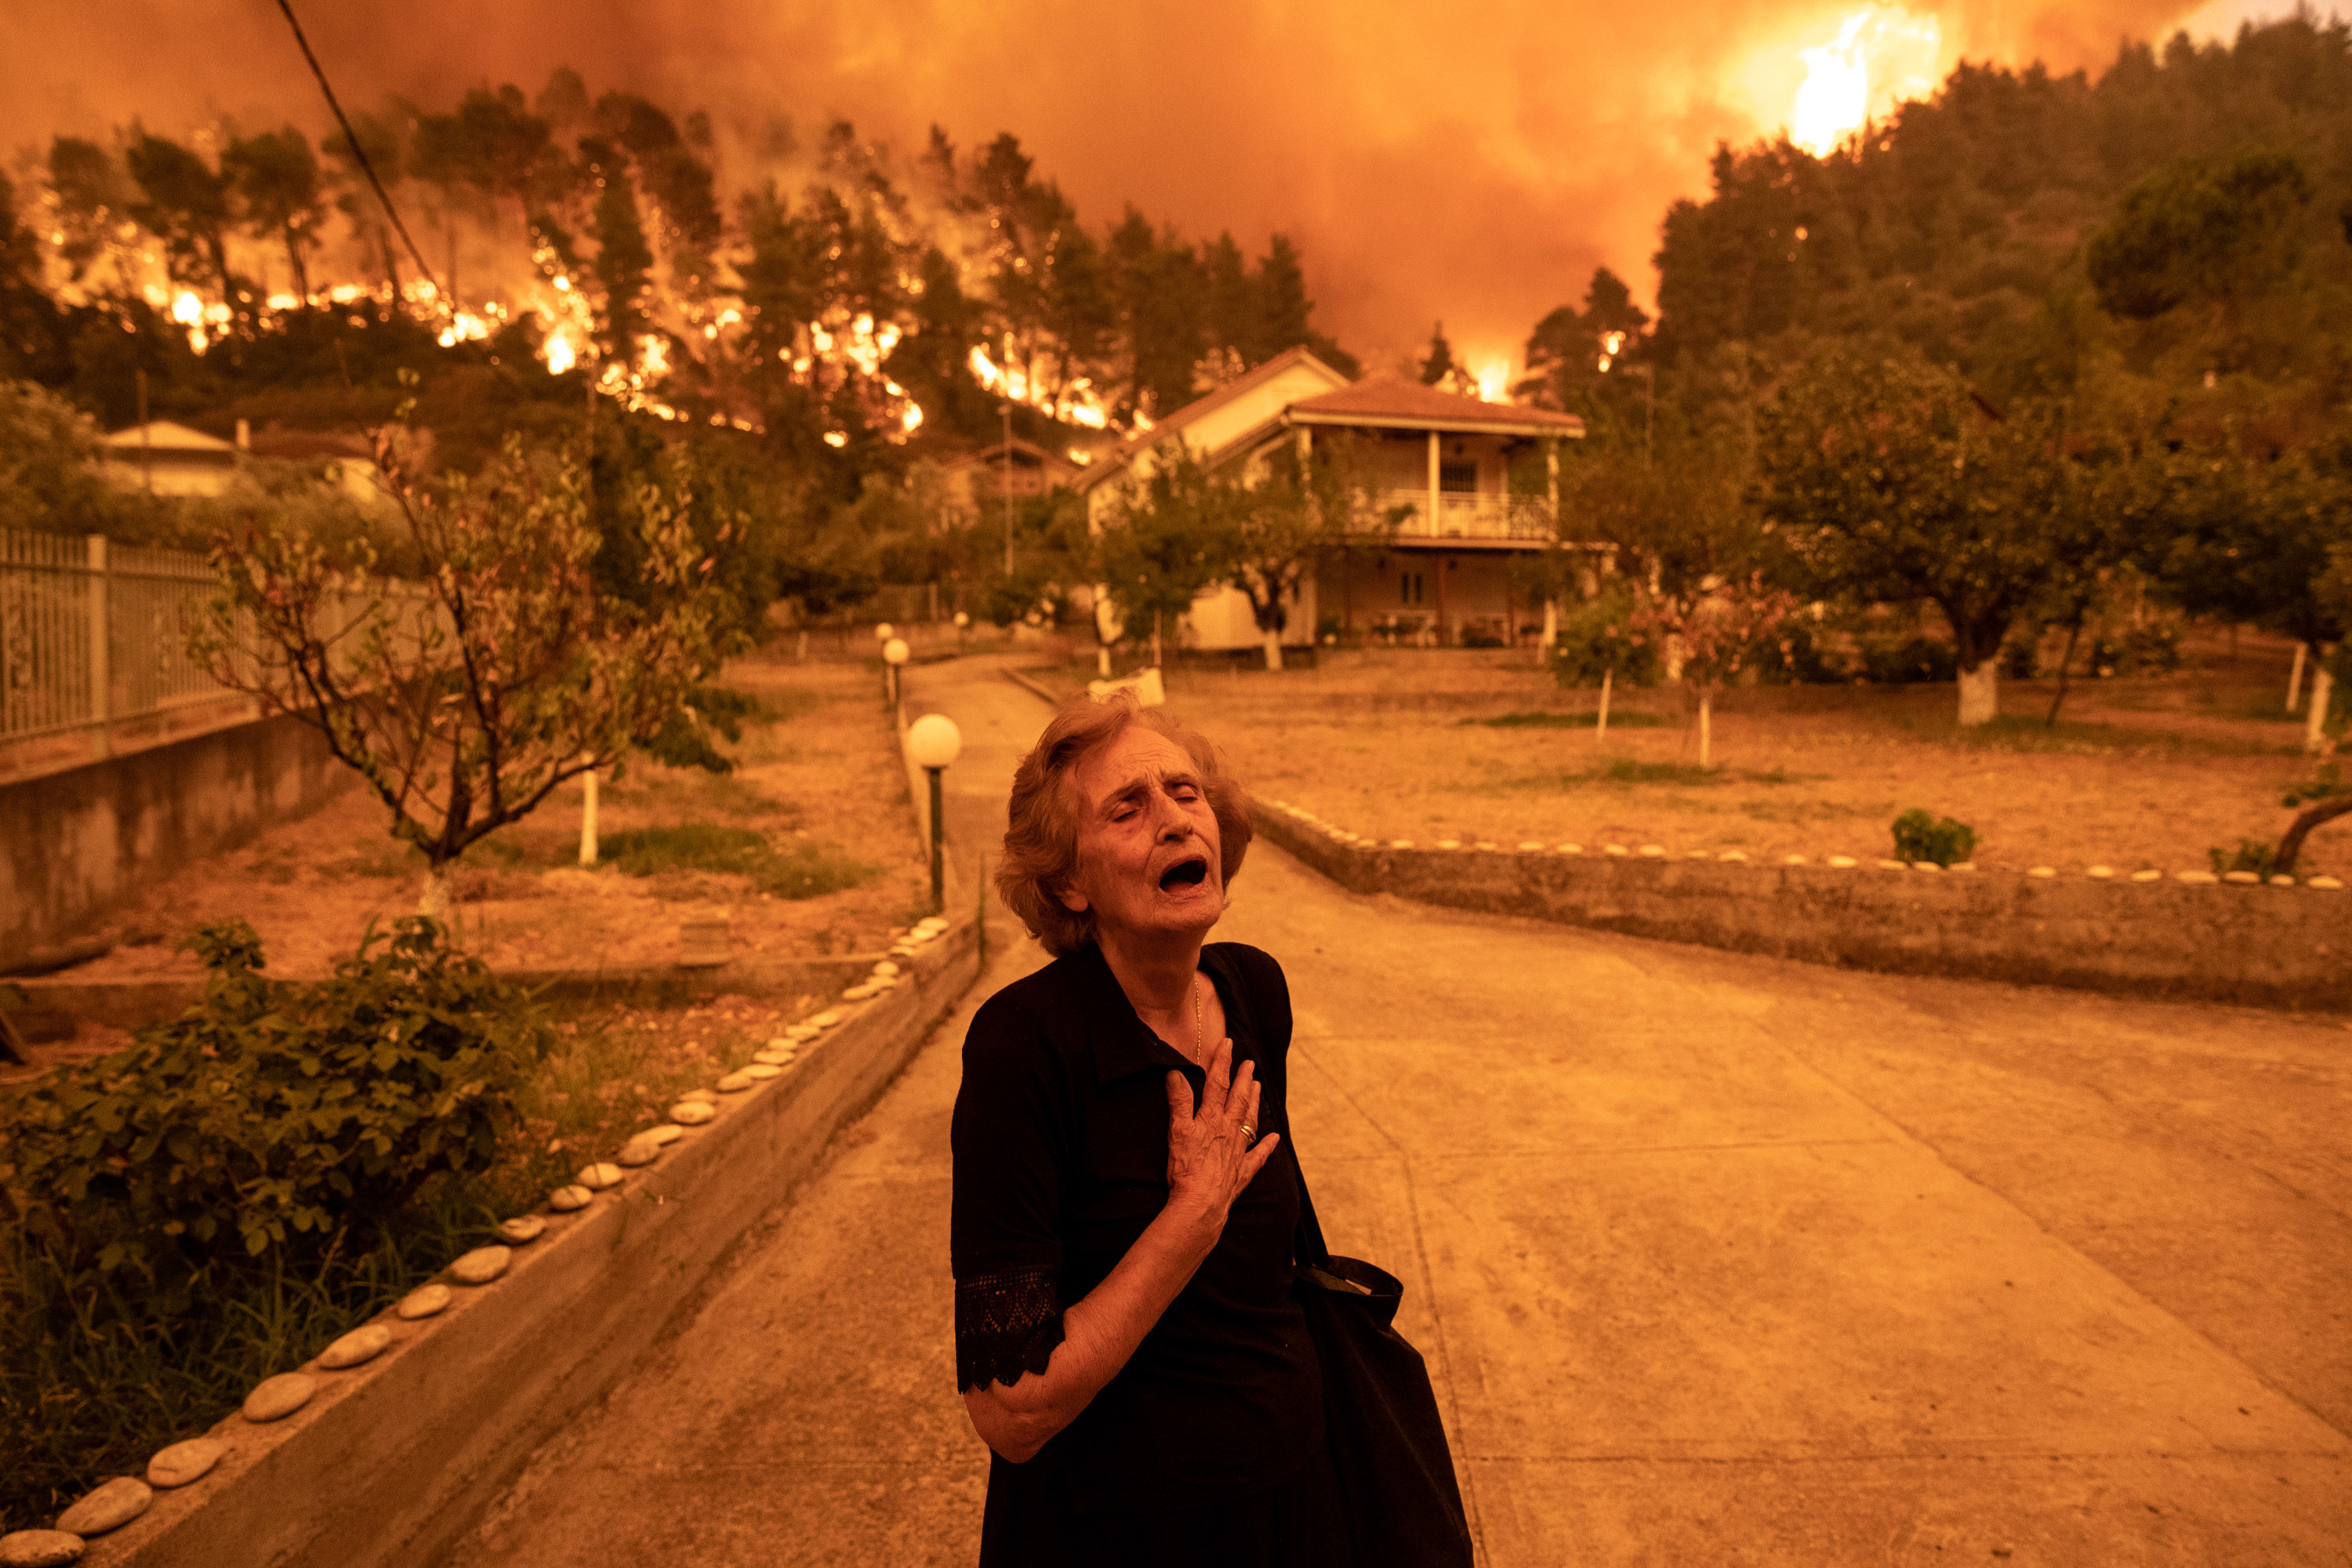 An older woman clutching her chest as the landscape burns in the background